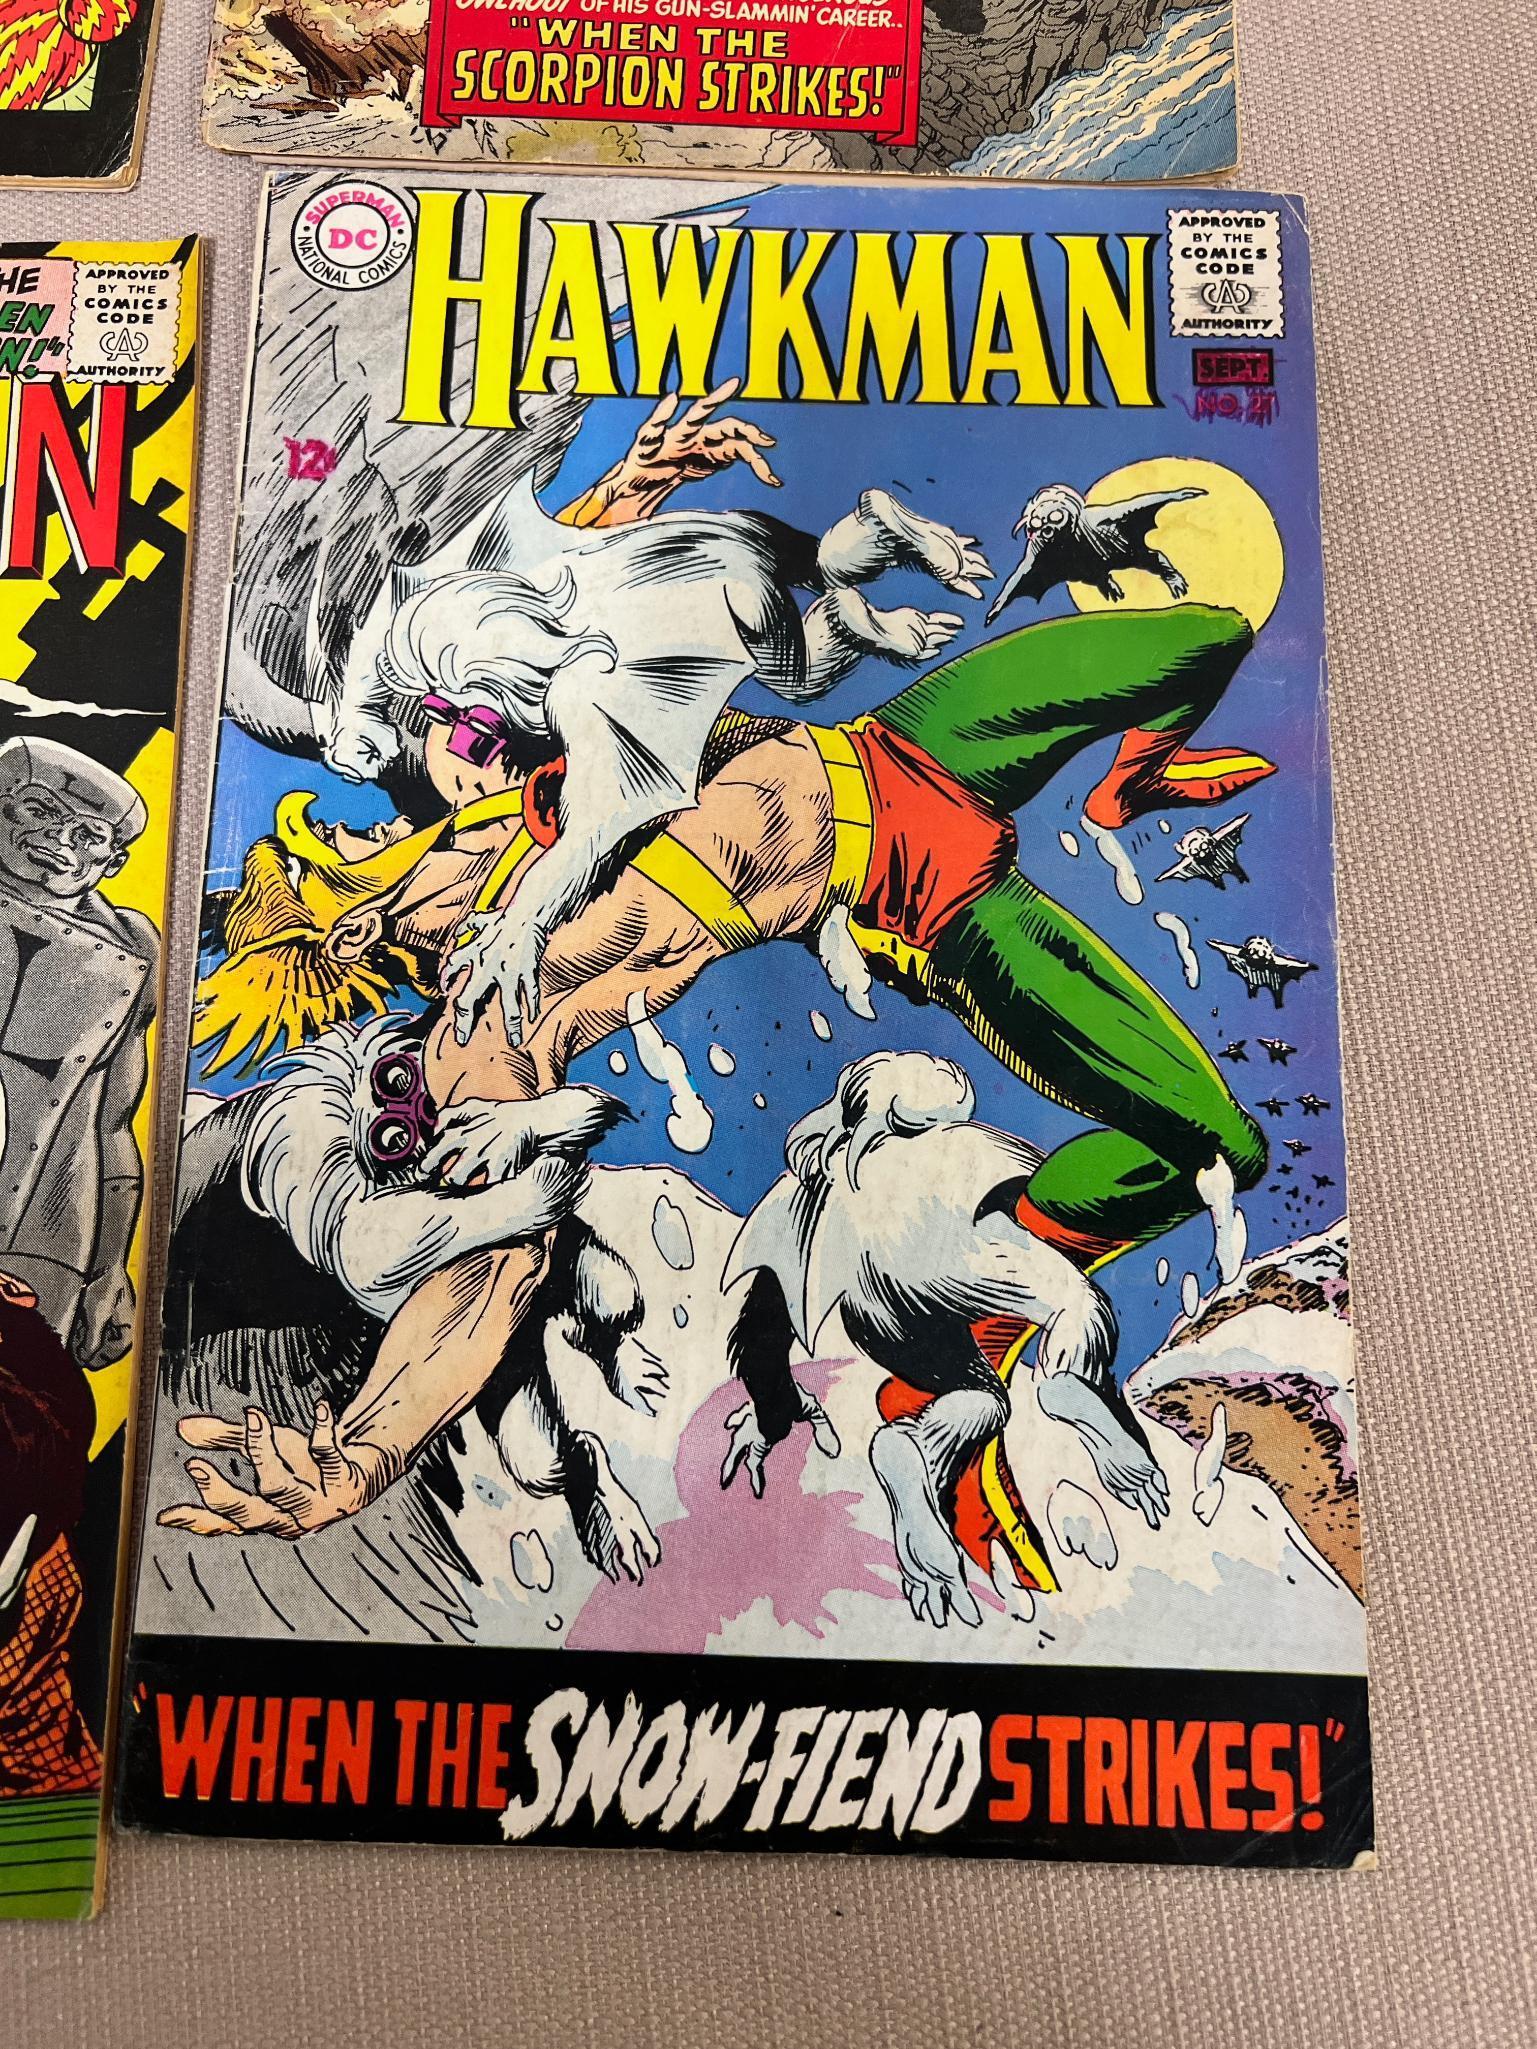 8- 12 Cent Comics, Metal Men, Fly Man, Rawhide Kid, Hawkman and more, see all pics